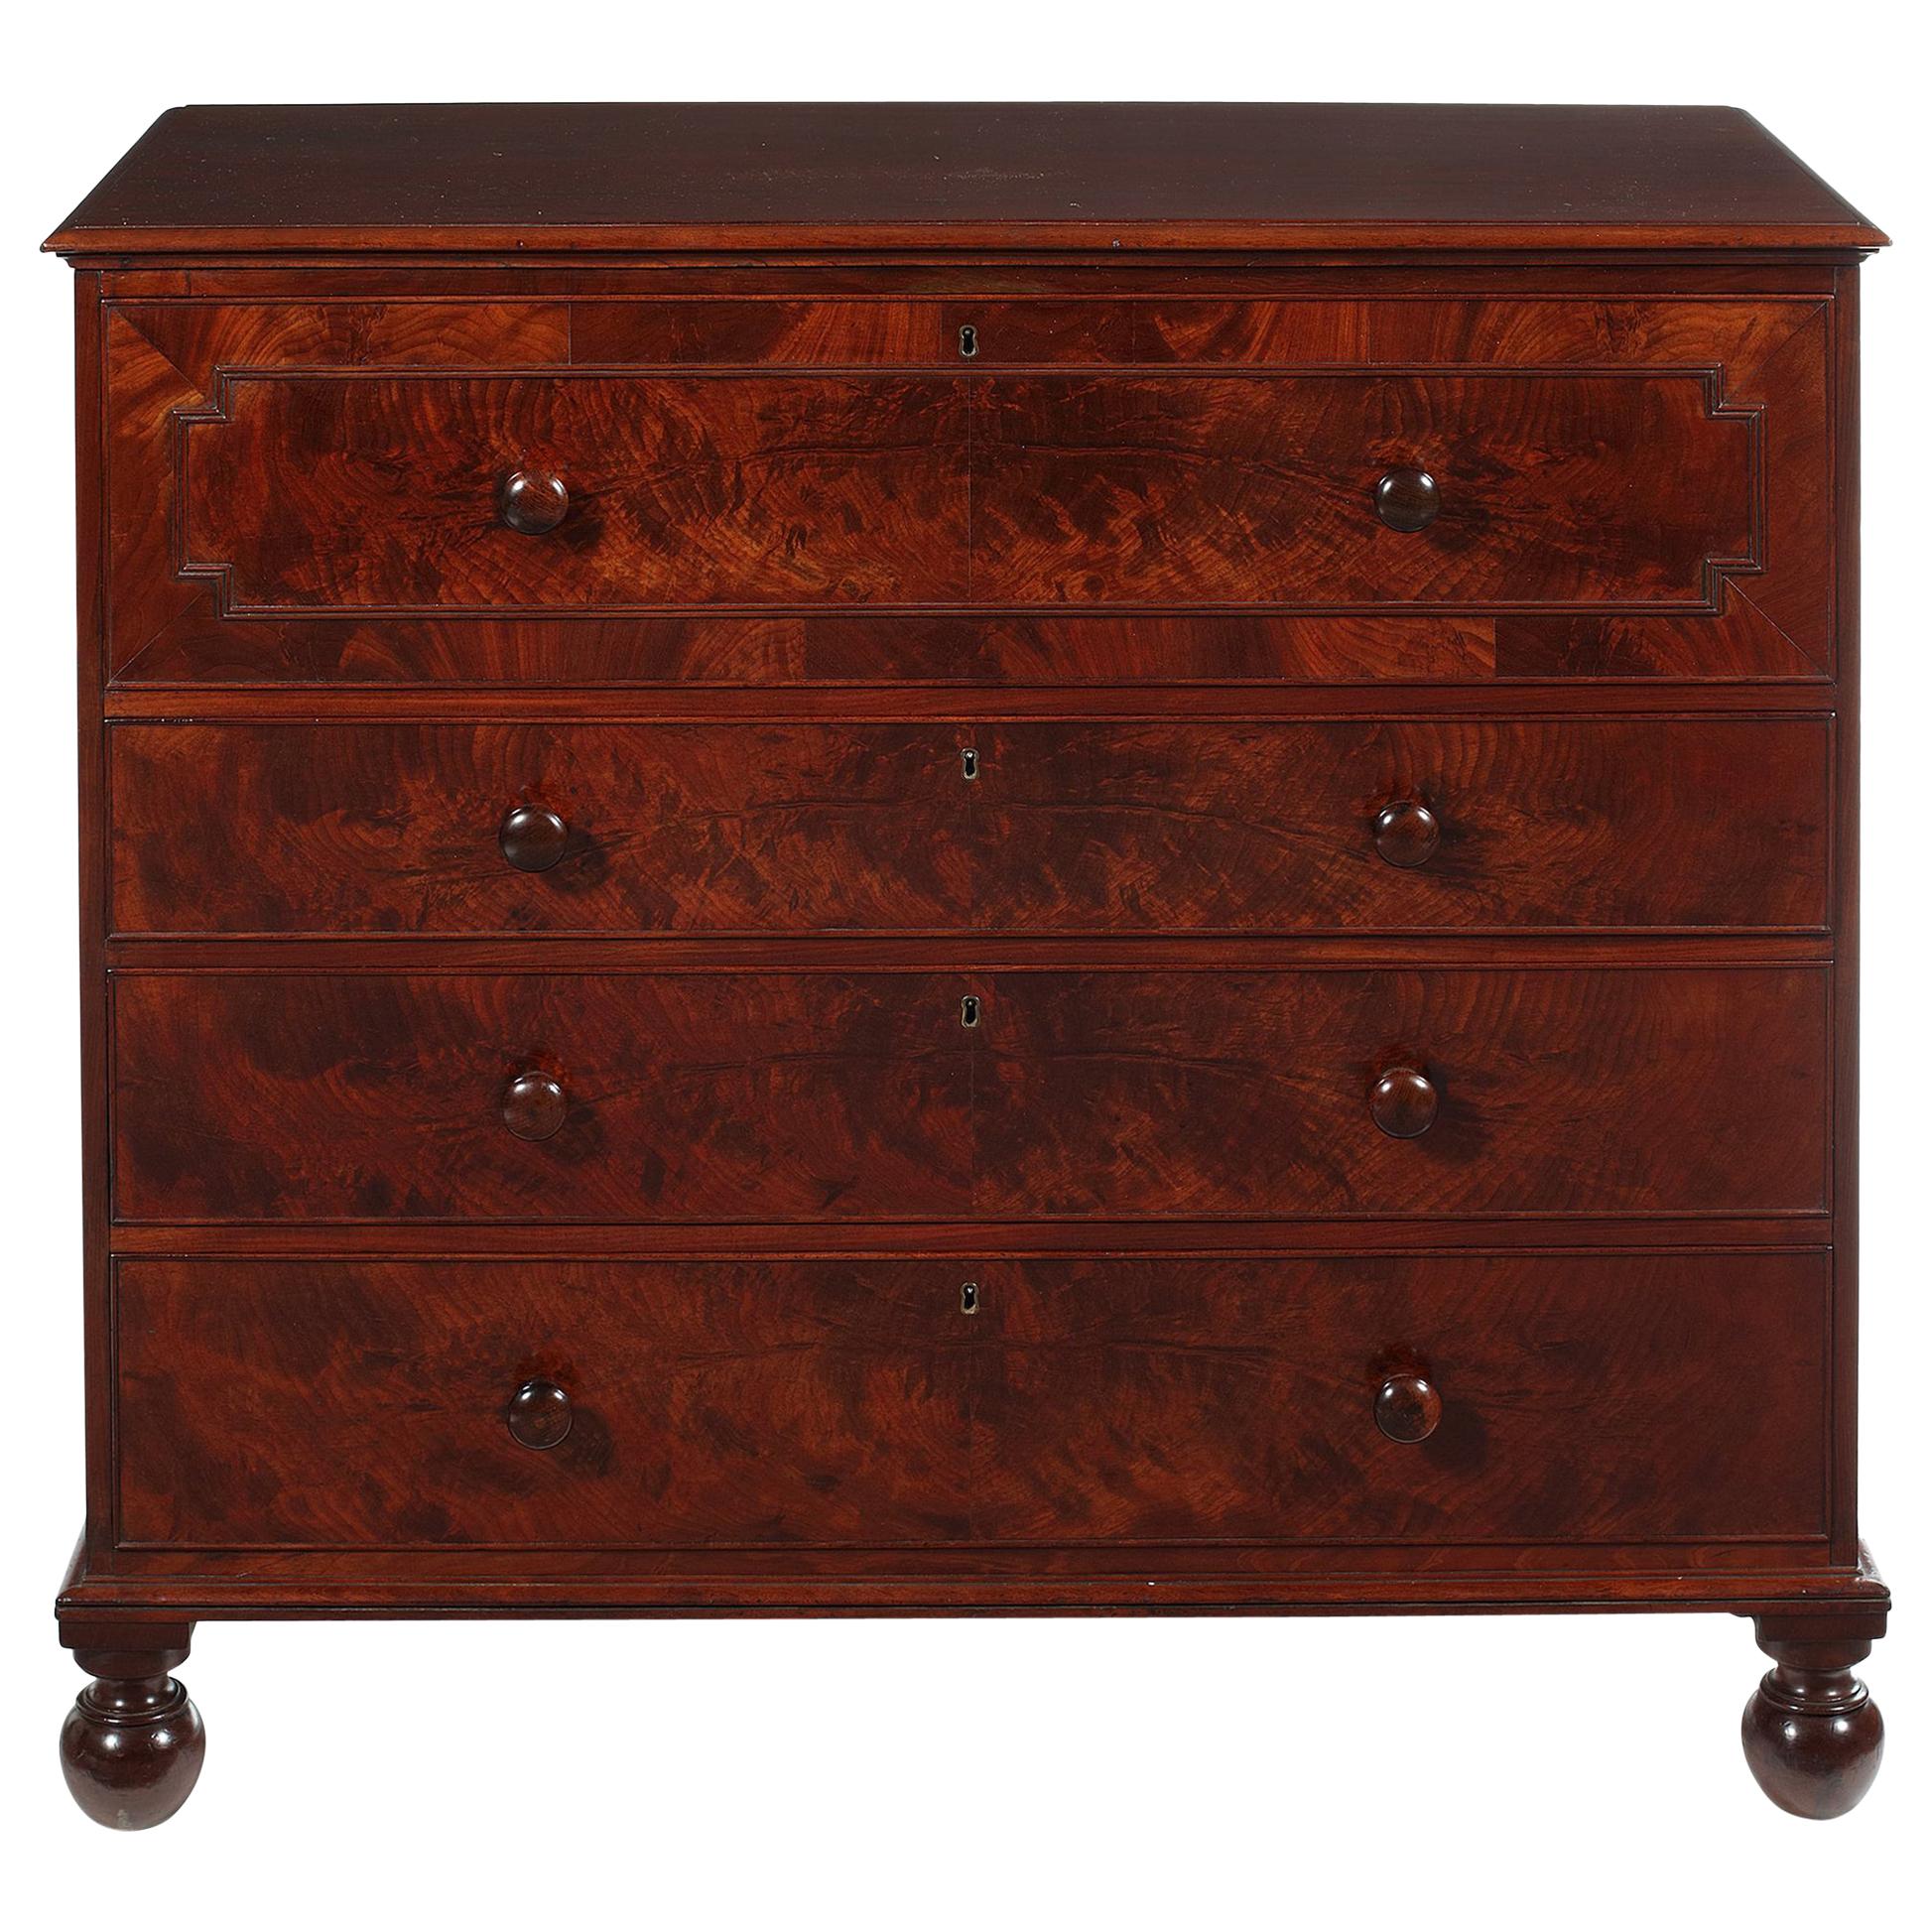 George IV Mahogany Chest Attributed to Gillows, circa 1850